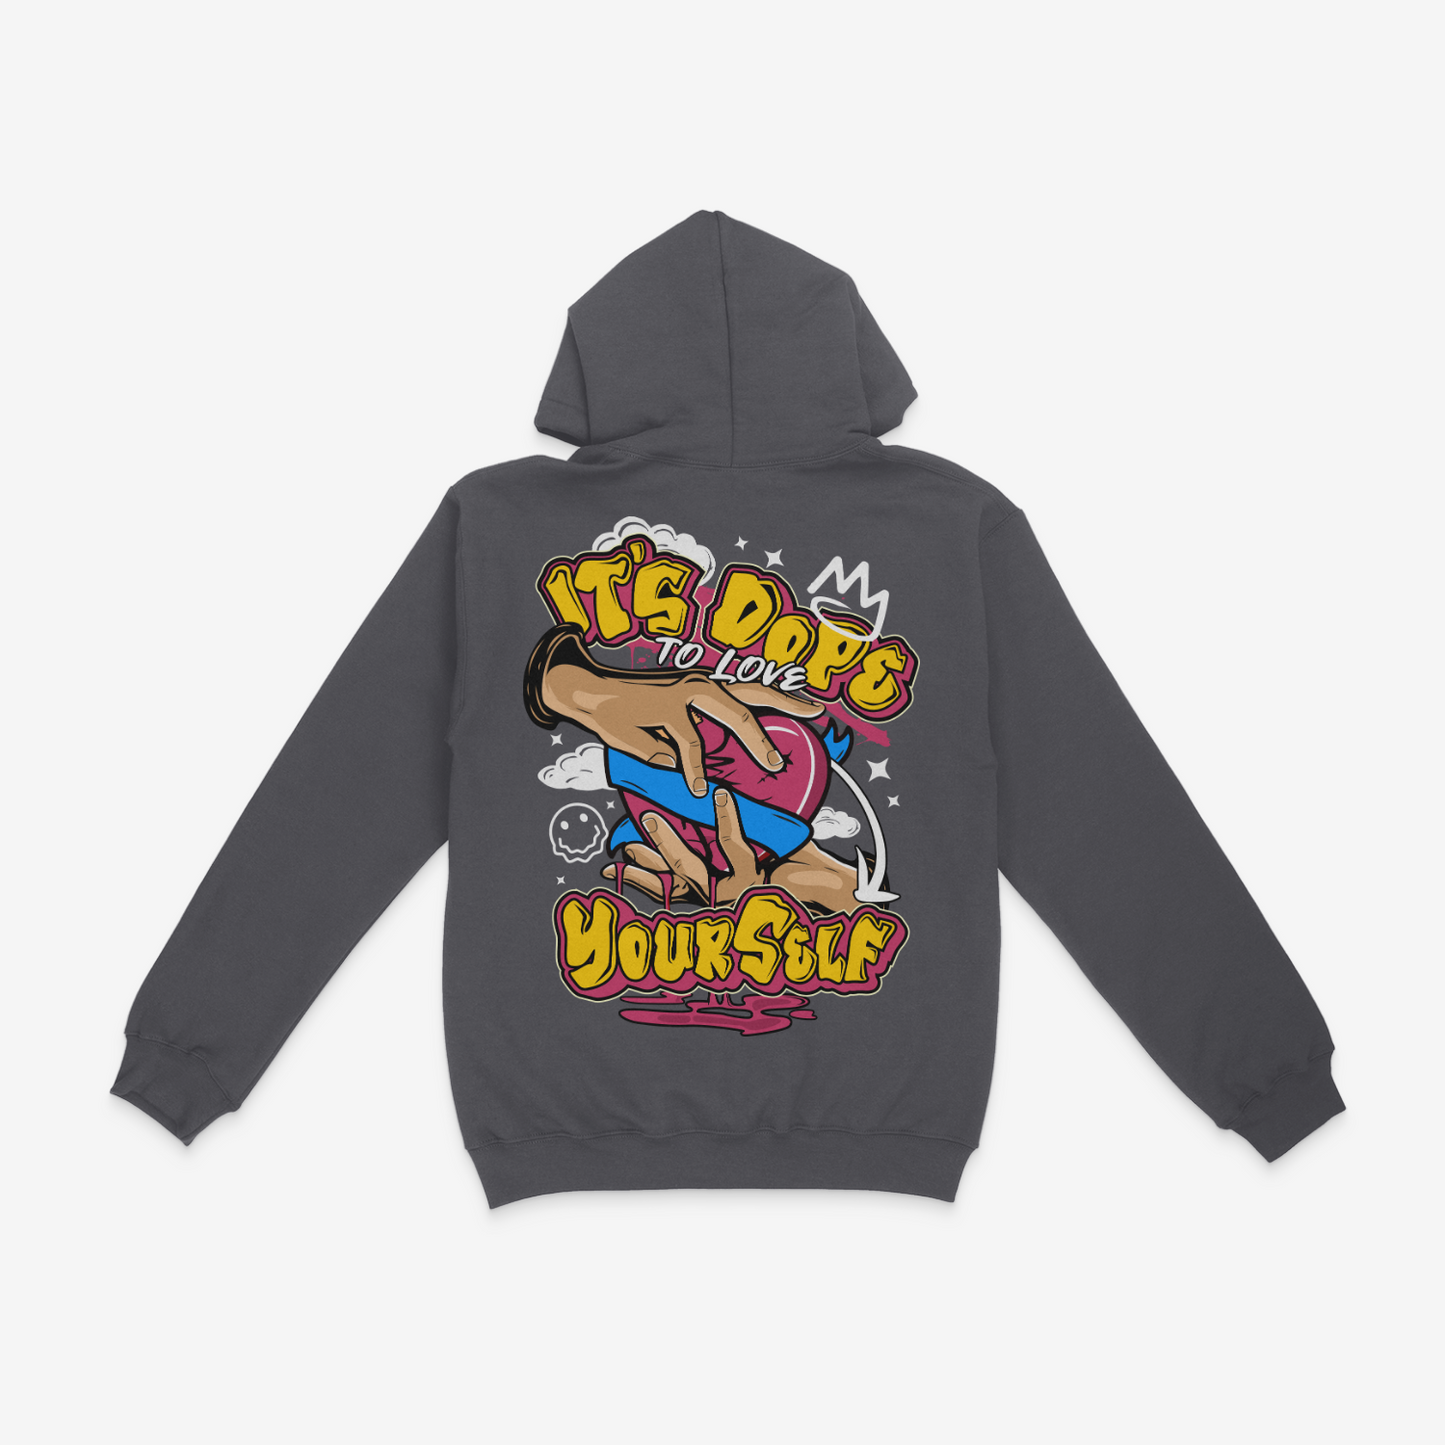 It's Dope To Love Yourself Graphic Unisex Hoodie